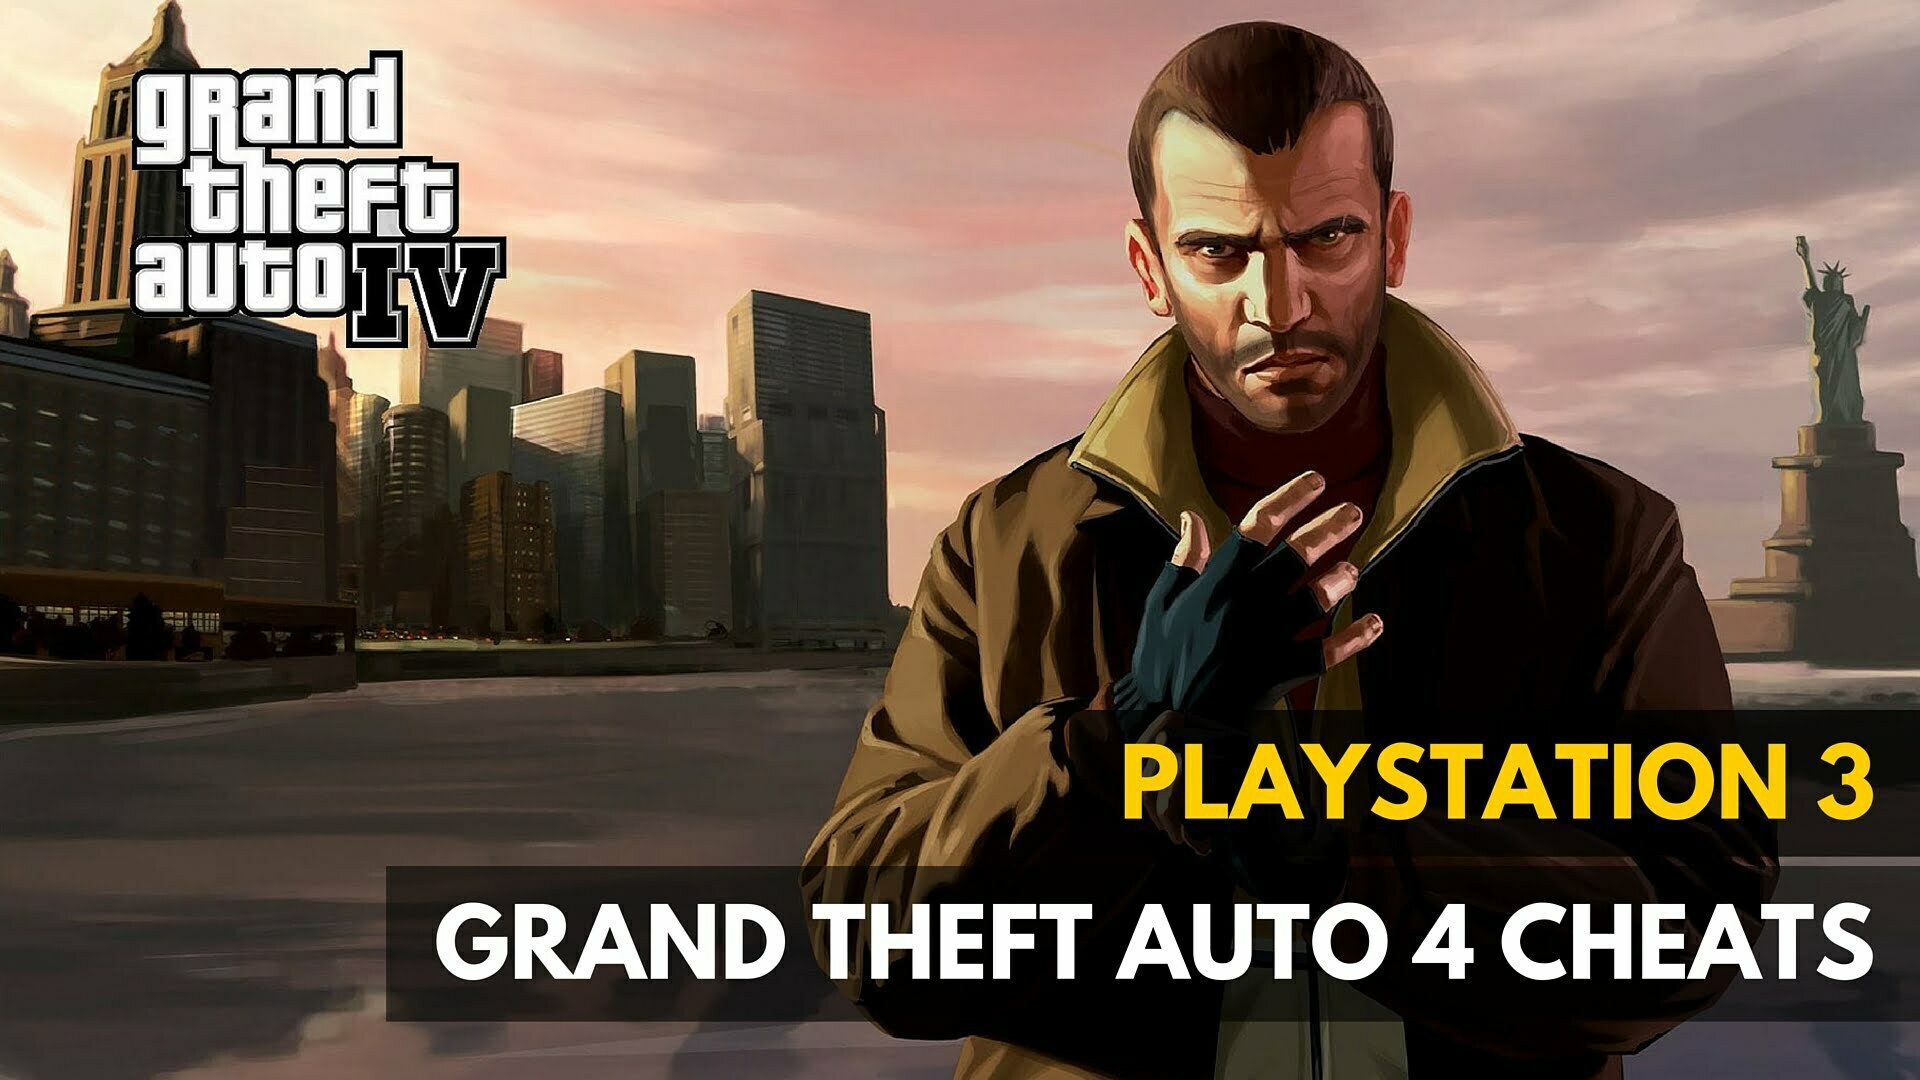 Grand Theft Auto 4 For Playstation 3 - Gadget Review